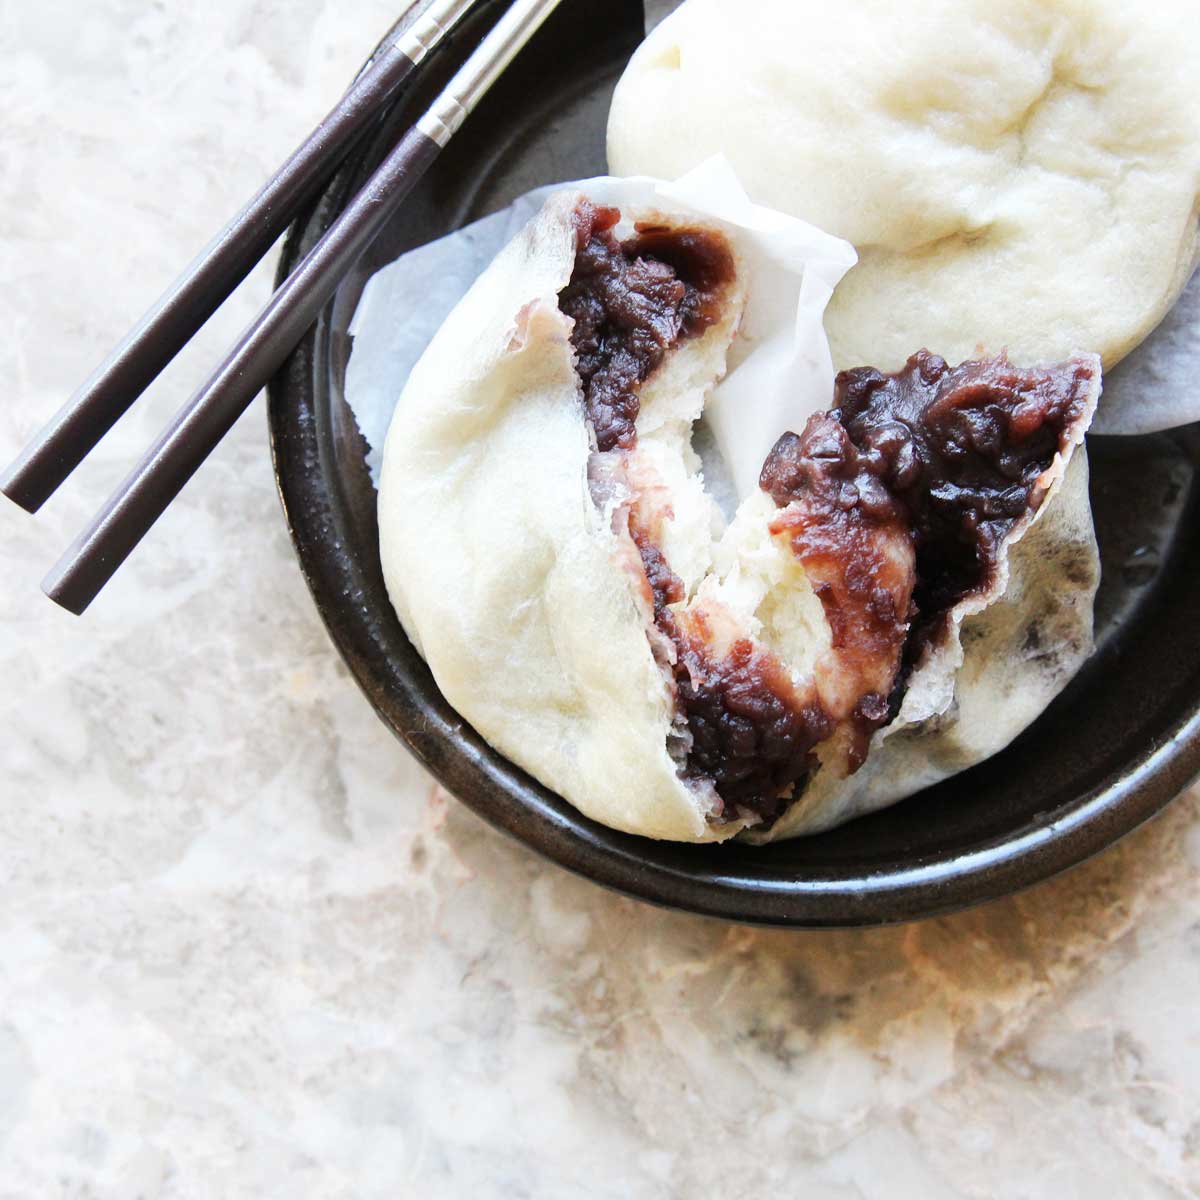 3-Ingredient Vegan Steamed Buns "Mantou" Recipe Made Without Yeast - steamed buns